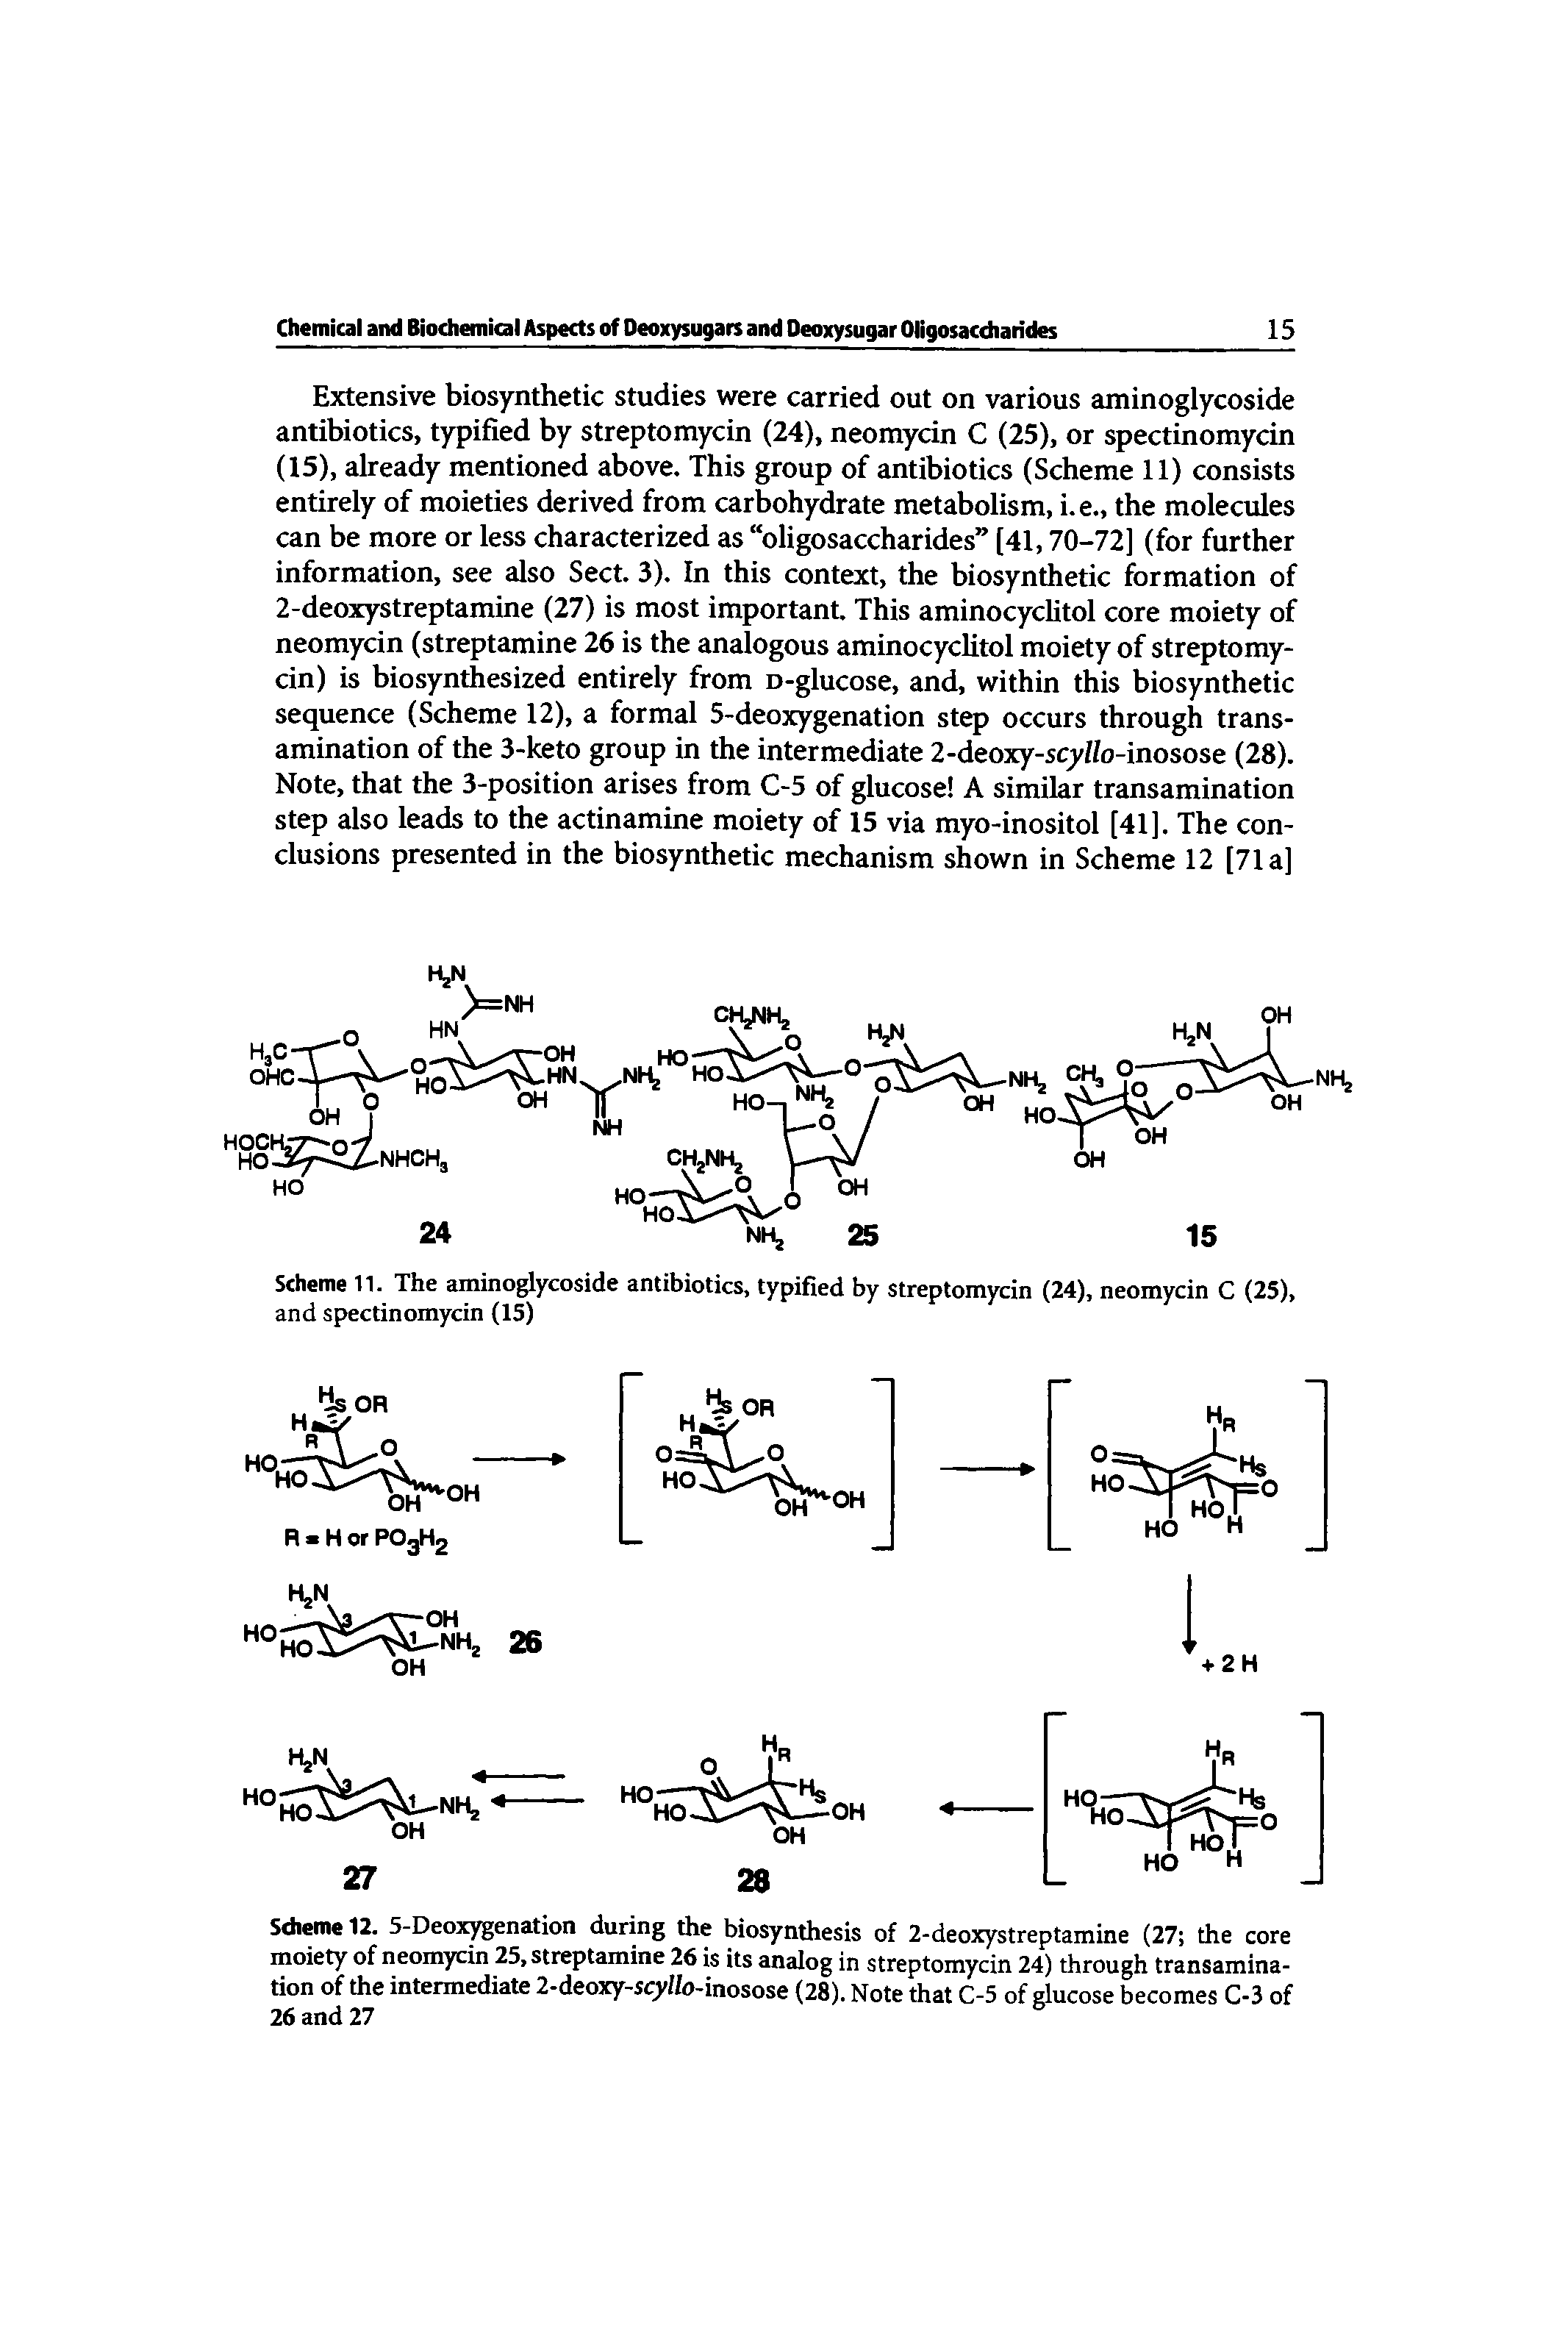 Scheme 12. 5-Deoxygenation during the biosynthesis of 2-deoxystreptamine (27 the core moiety of neomycin 25, streptamine 26 is its analog in streptomycin 24) through transamination of the intermediate 2-deoxy-scyl/o-inosose (28). Note that C-5 of glucose becomes C-3 of 26 and 27...